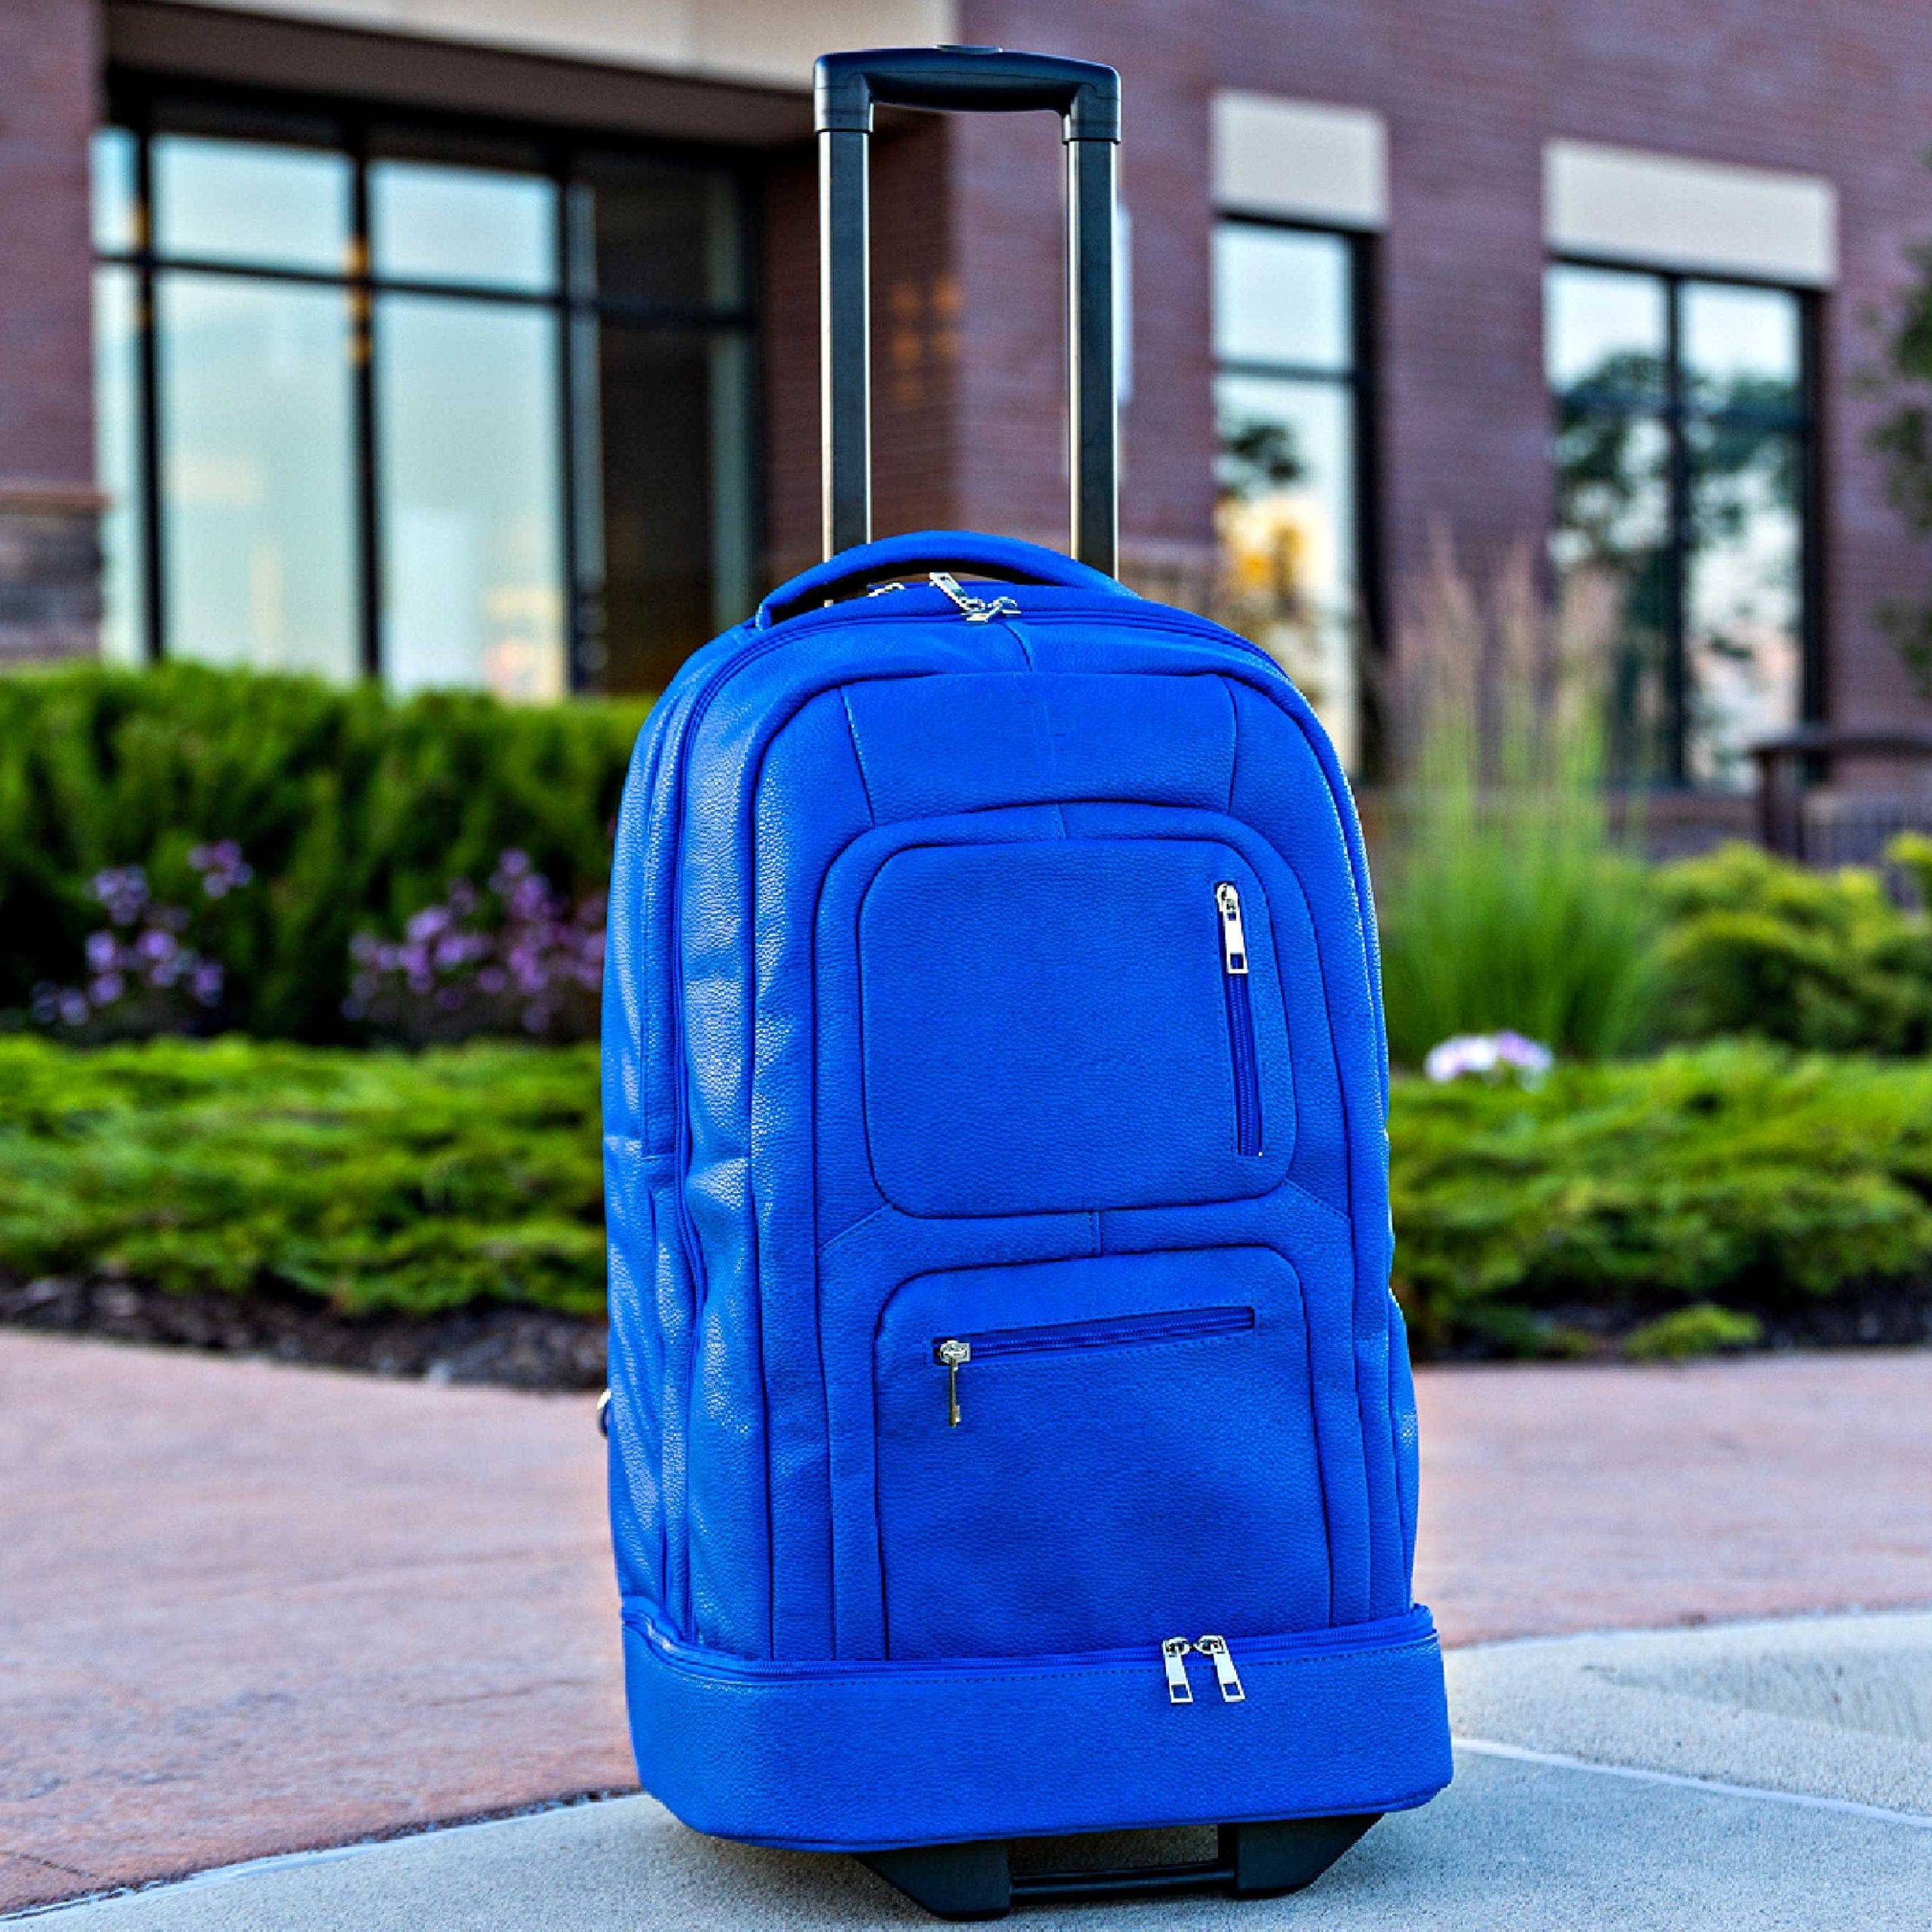 Royal Blue Tumbled Leather Roller Bag (Only 200 Made)